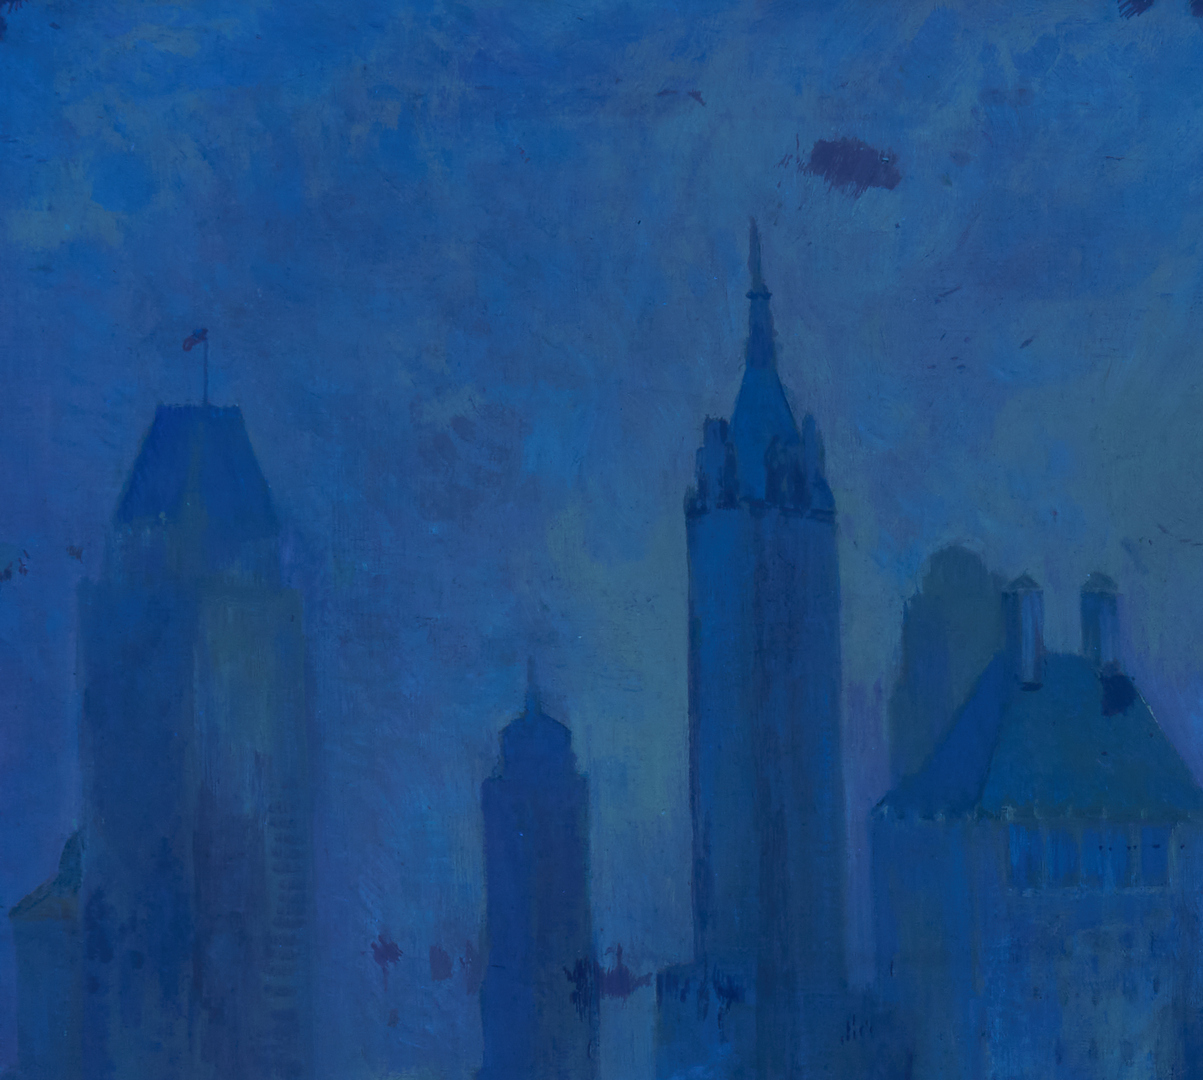 Lot 144: Hayley Lever O/C, "Early Morning Central Park"